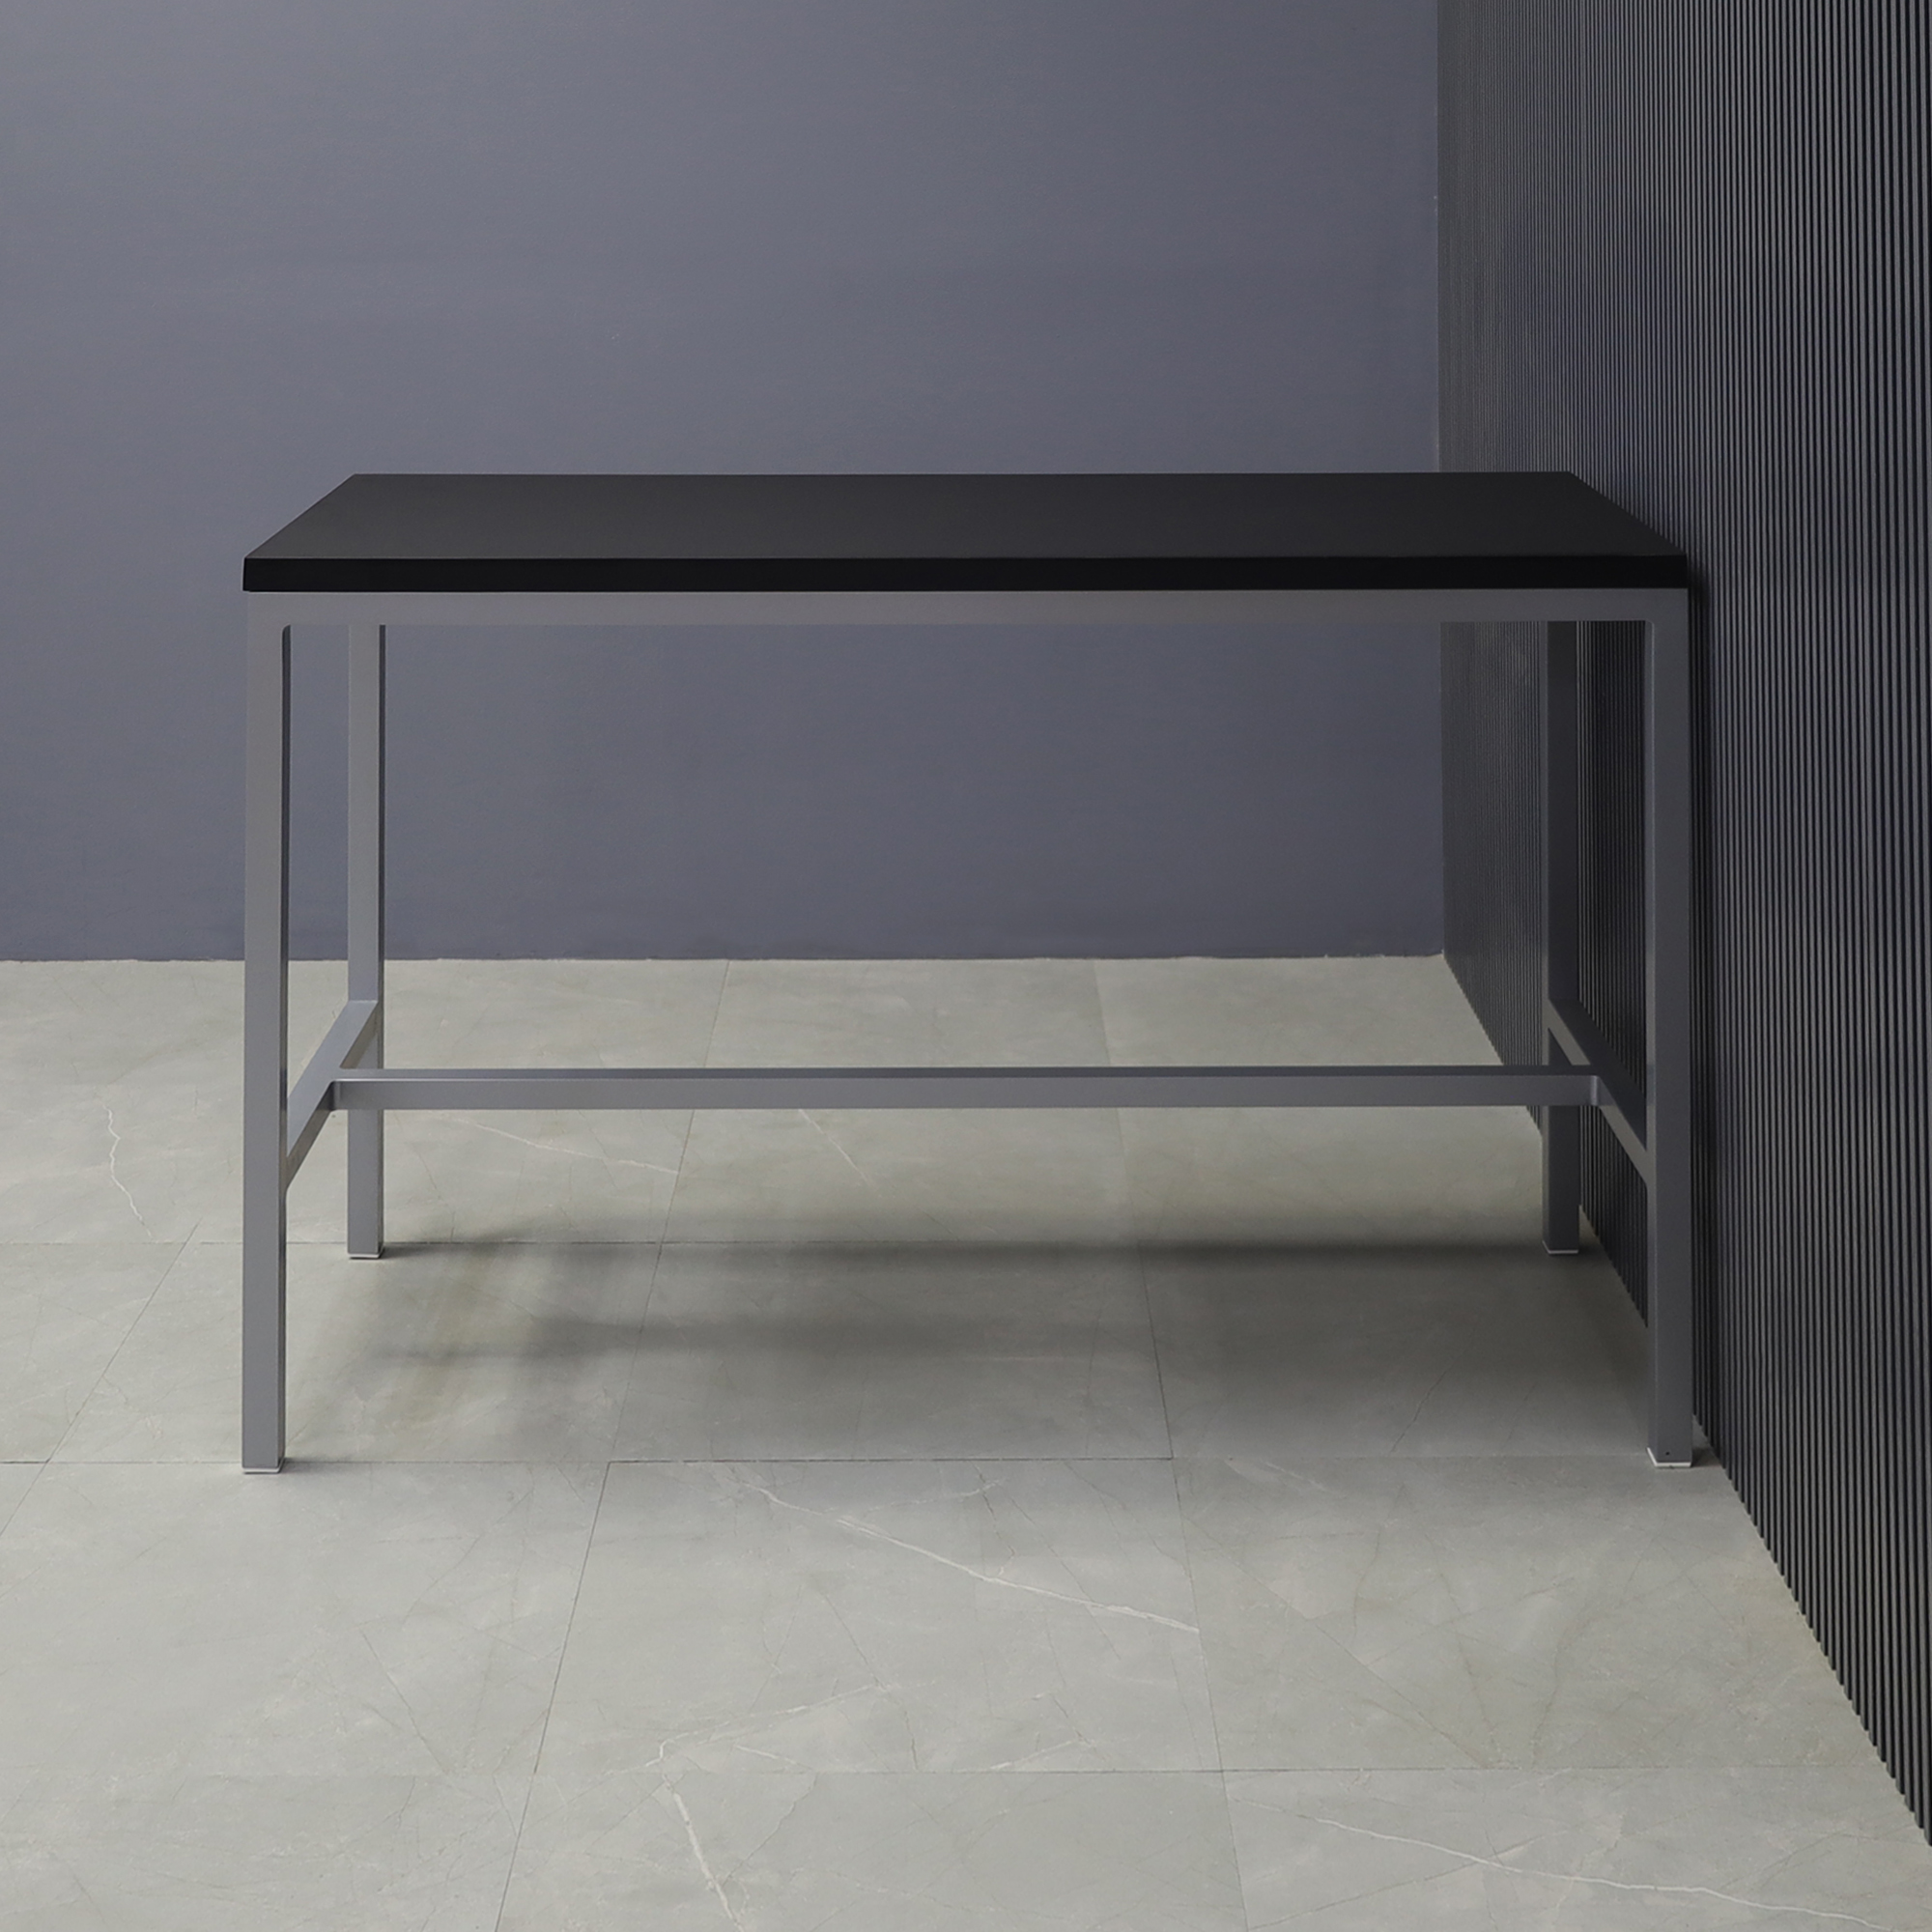 60-inch Aspen Bar Table in black traceless laminate top and gray metal frame shown here.